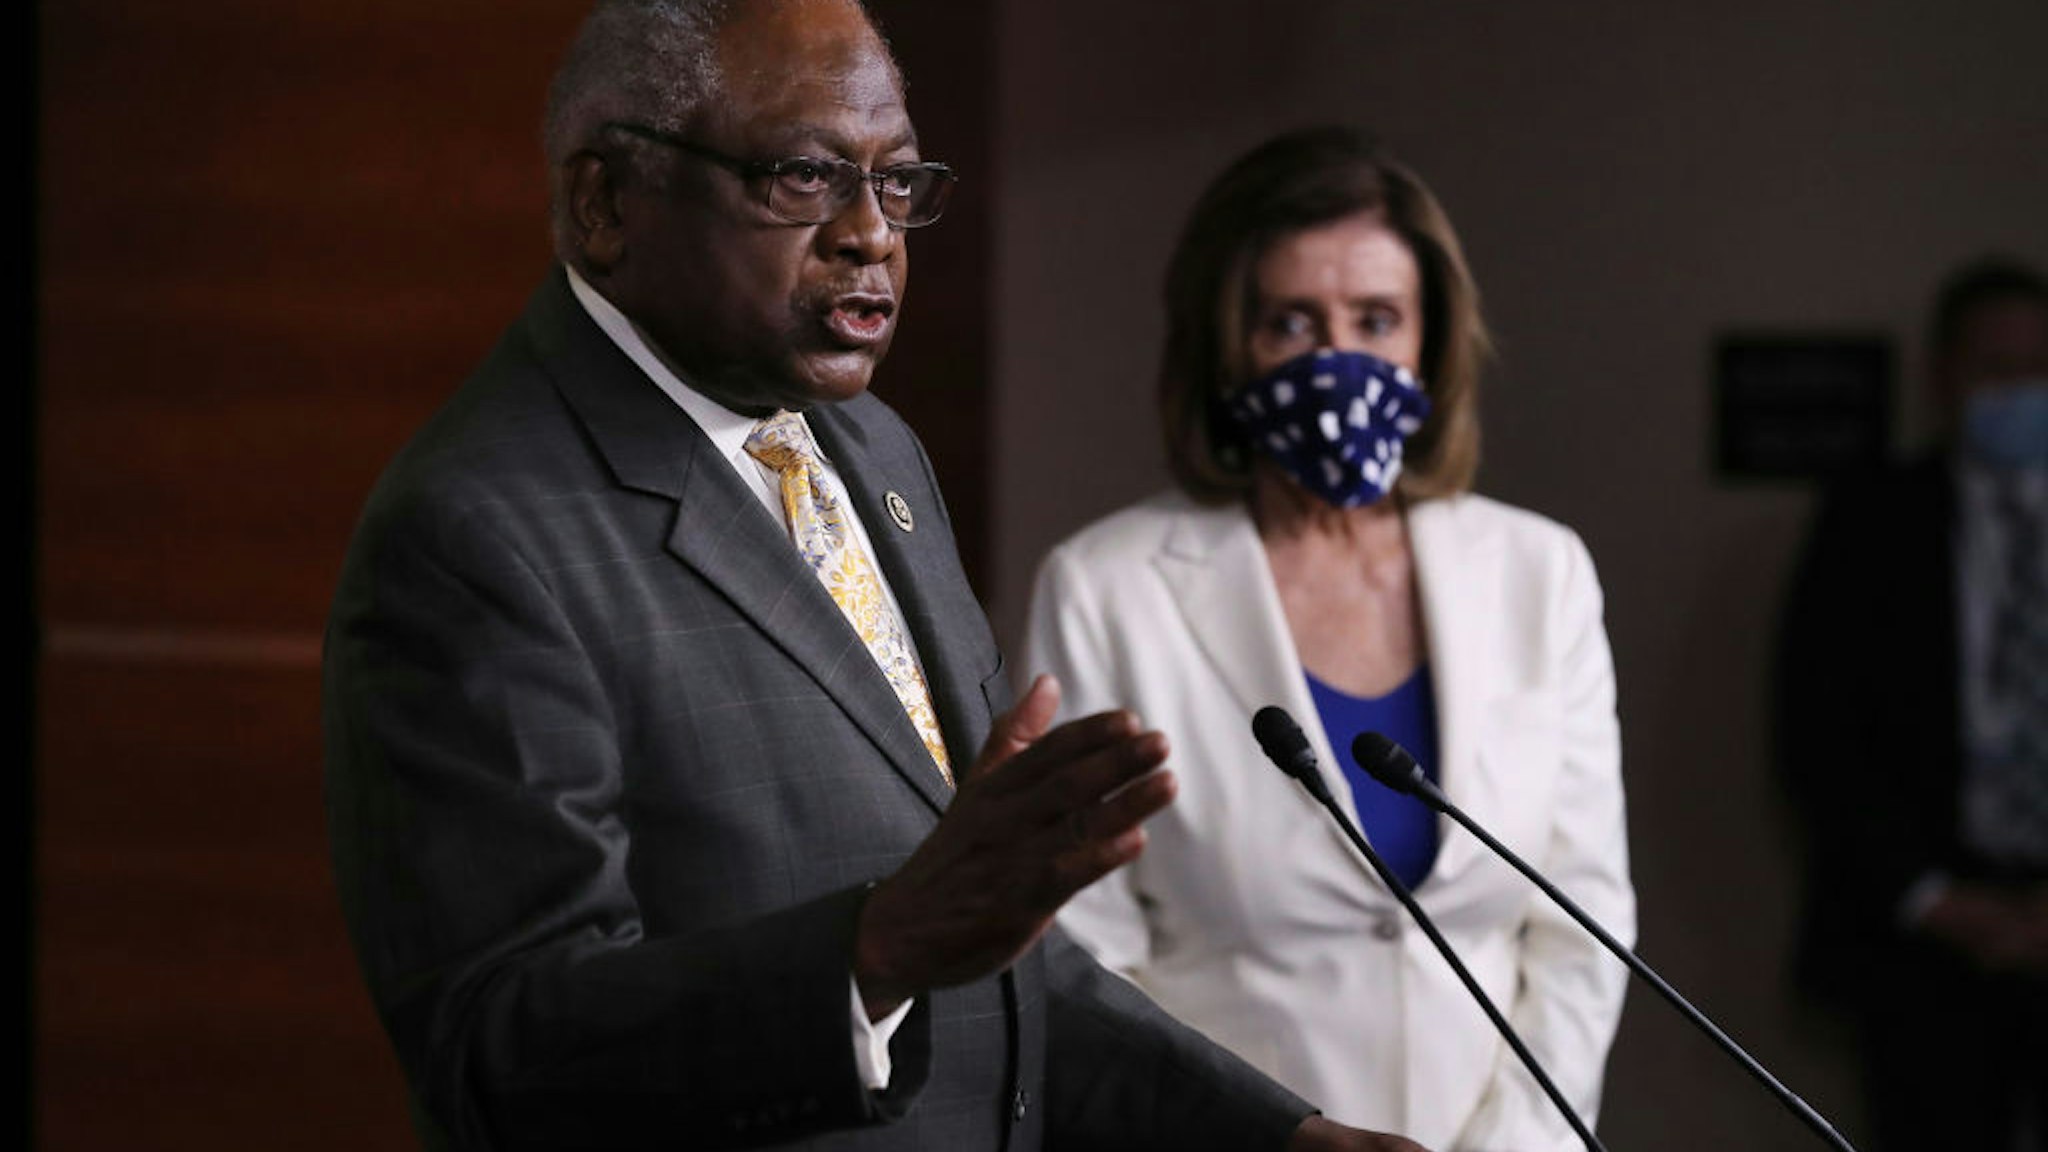 WASHINGTON, DC - APRIL 30: House Majority Whip James Clyburn (D-SC) answers reporters' questions during a news conference with Speaker of the House Nancy Pelosi (D-CA) at the U.S. Capitol April 30, 2020 in Washington, DC. While she and Democratic House leaders are not going to reconvene next week due to the COVID-19 pandemic, she said committee chairs are working on the next piece of economic rescue legislation.